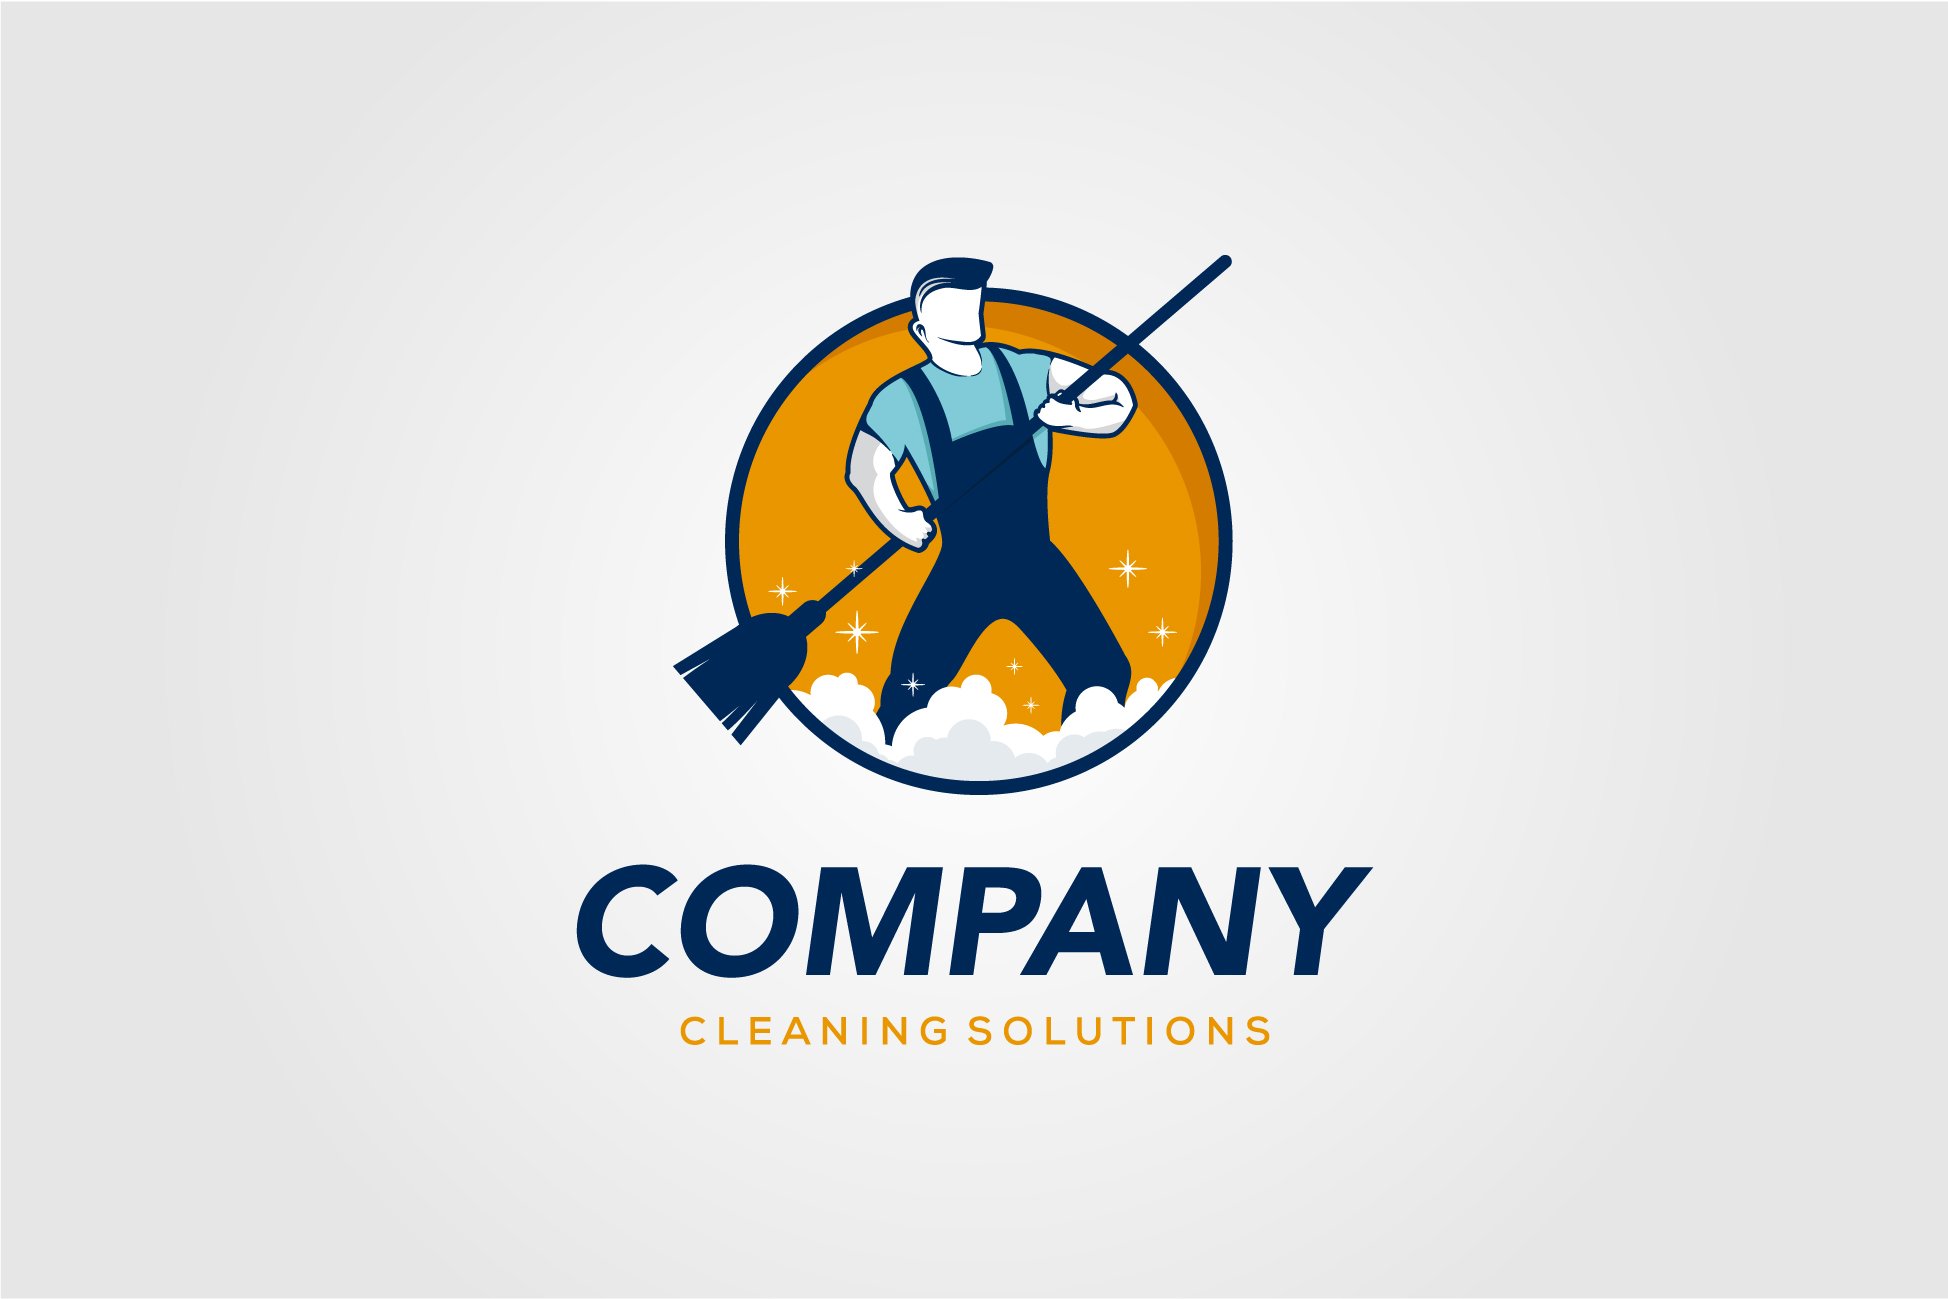 Creative Man Cleaning Concept Logo cover image.